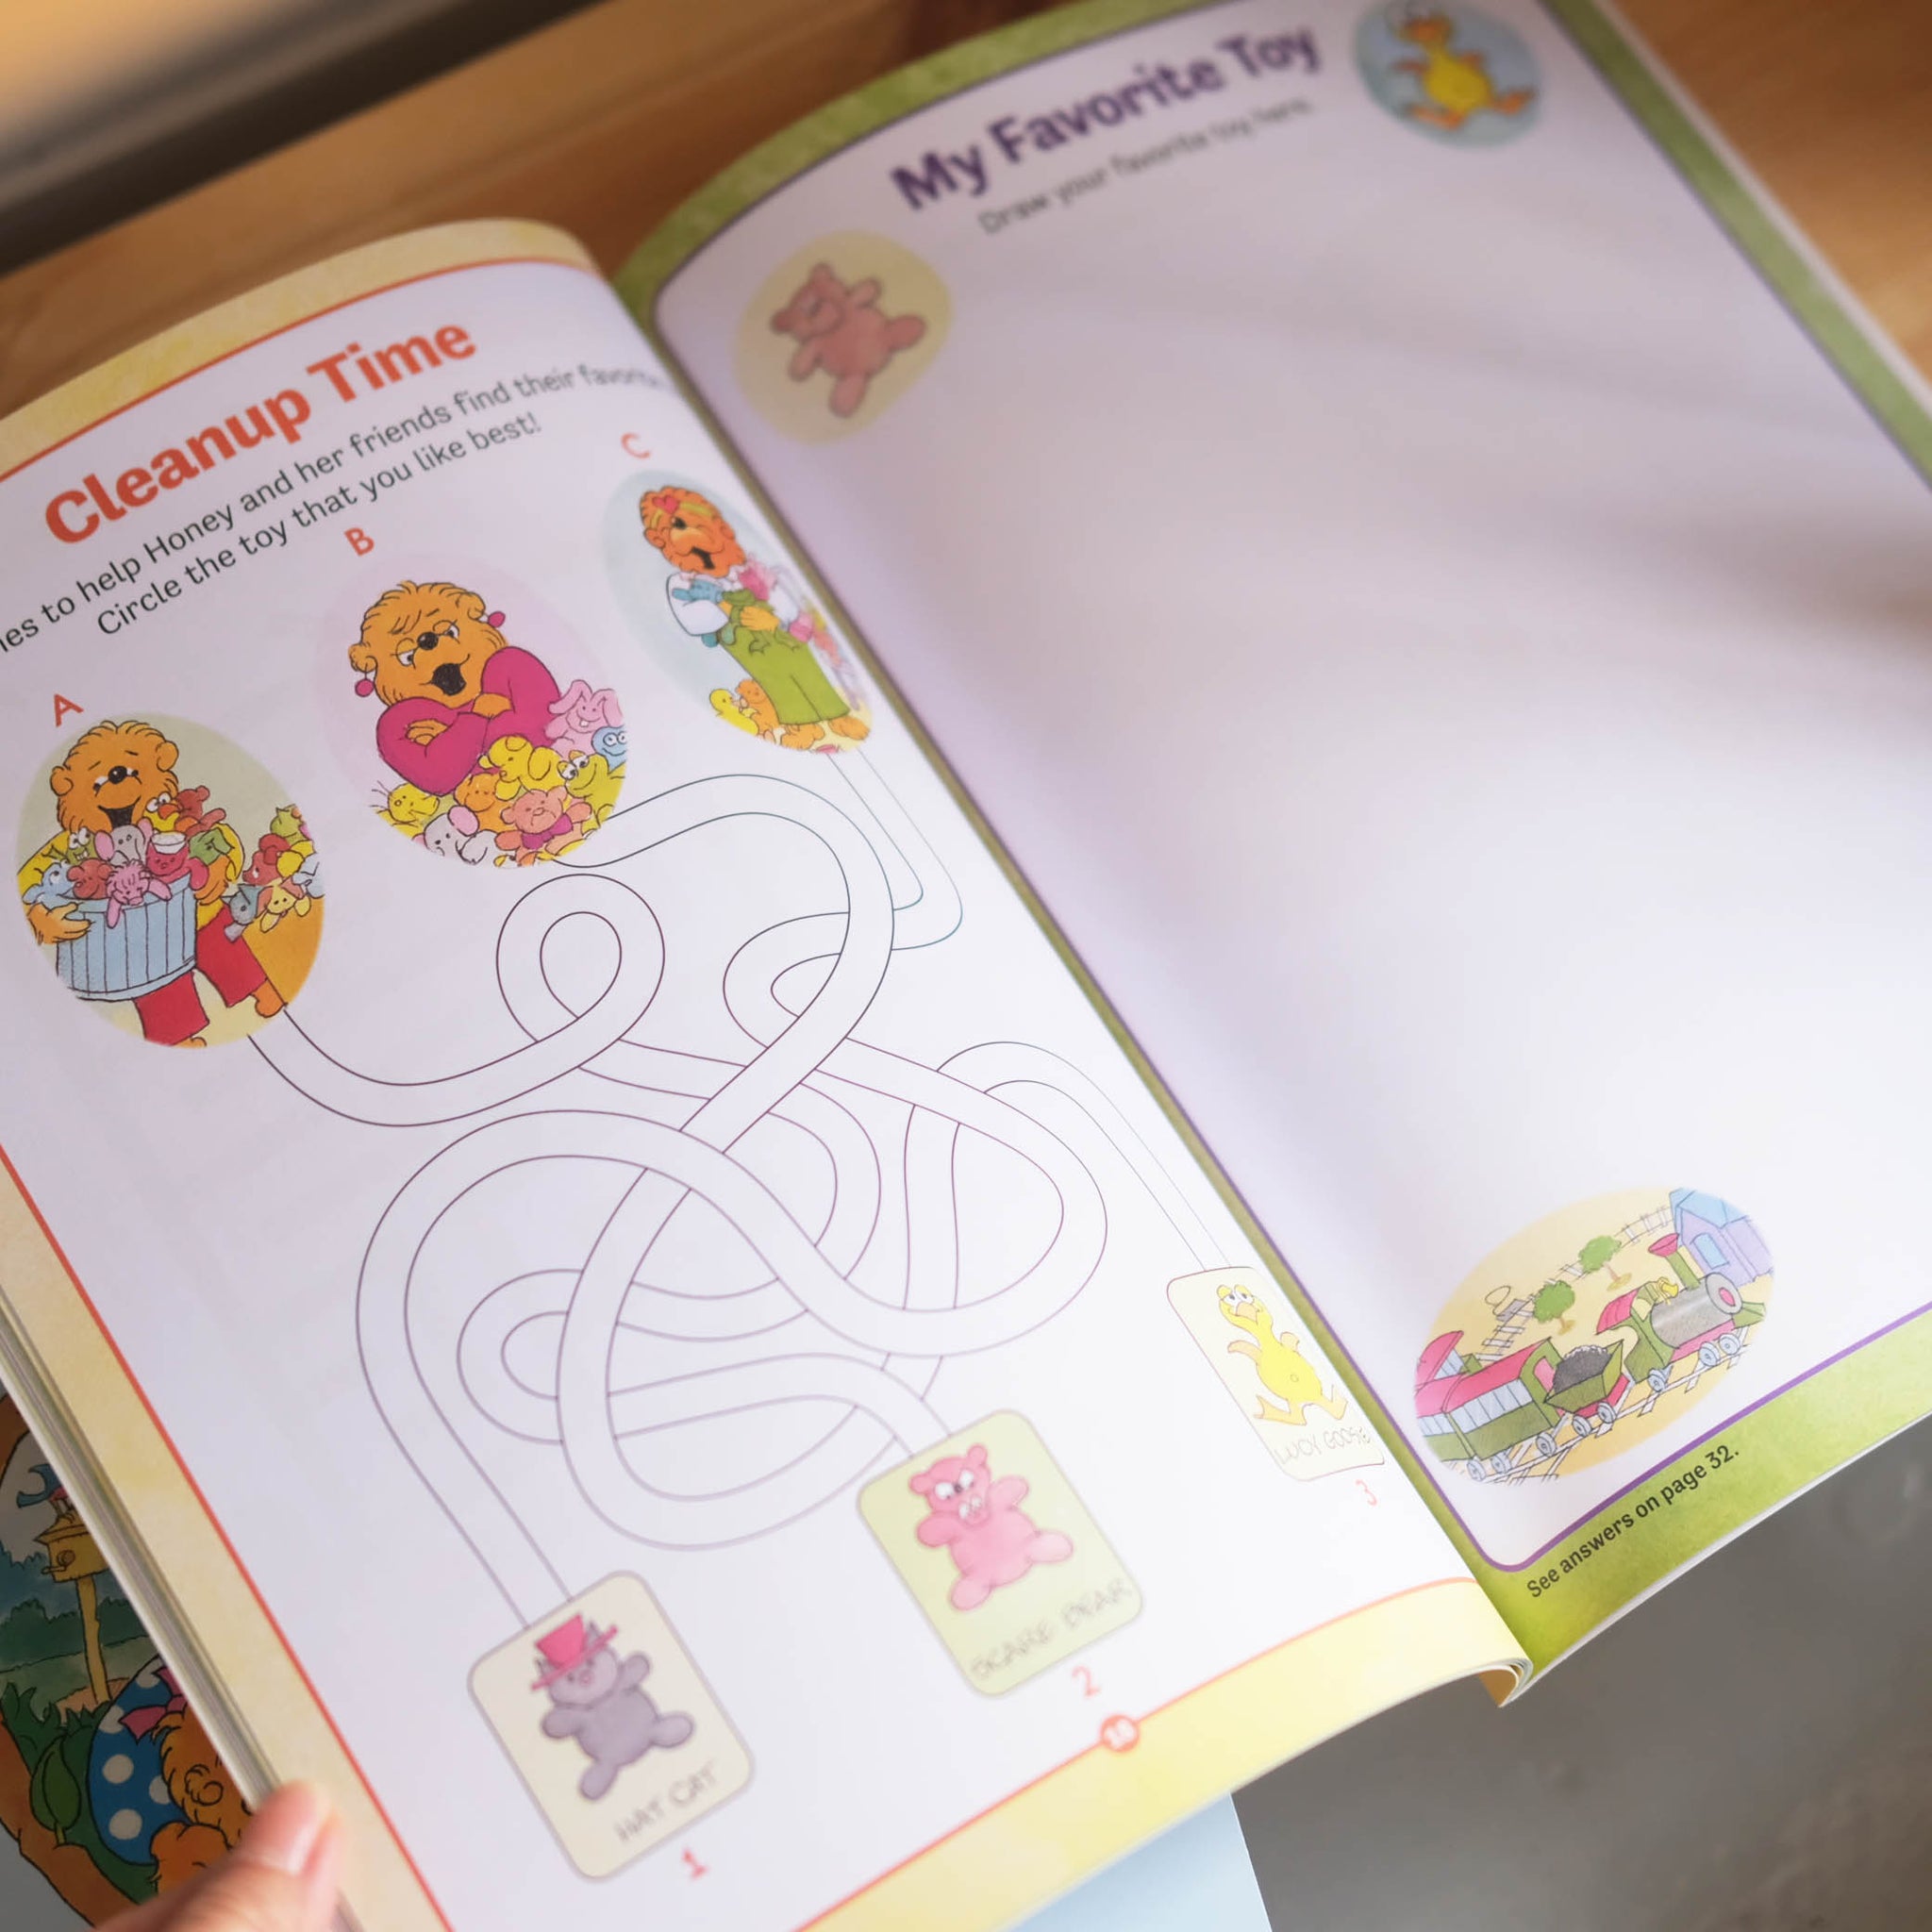 The Berenstain Bears Gifts of the Spirit Activity Book Series